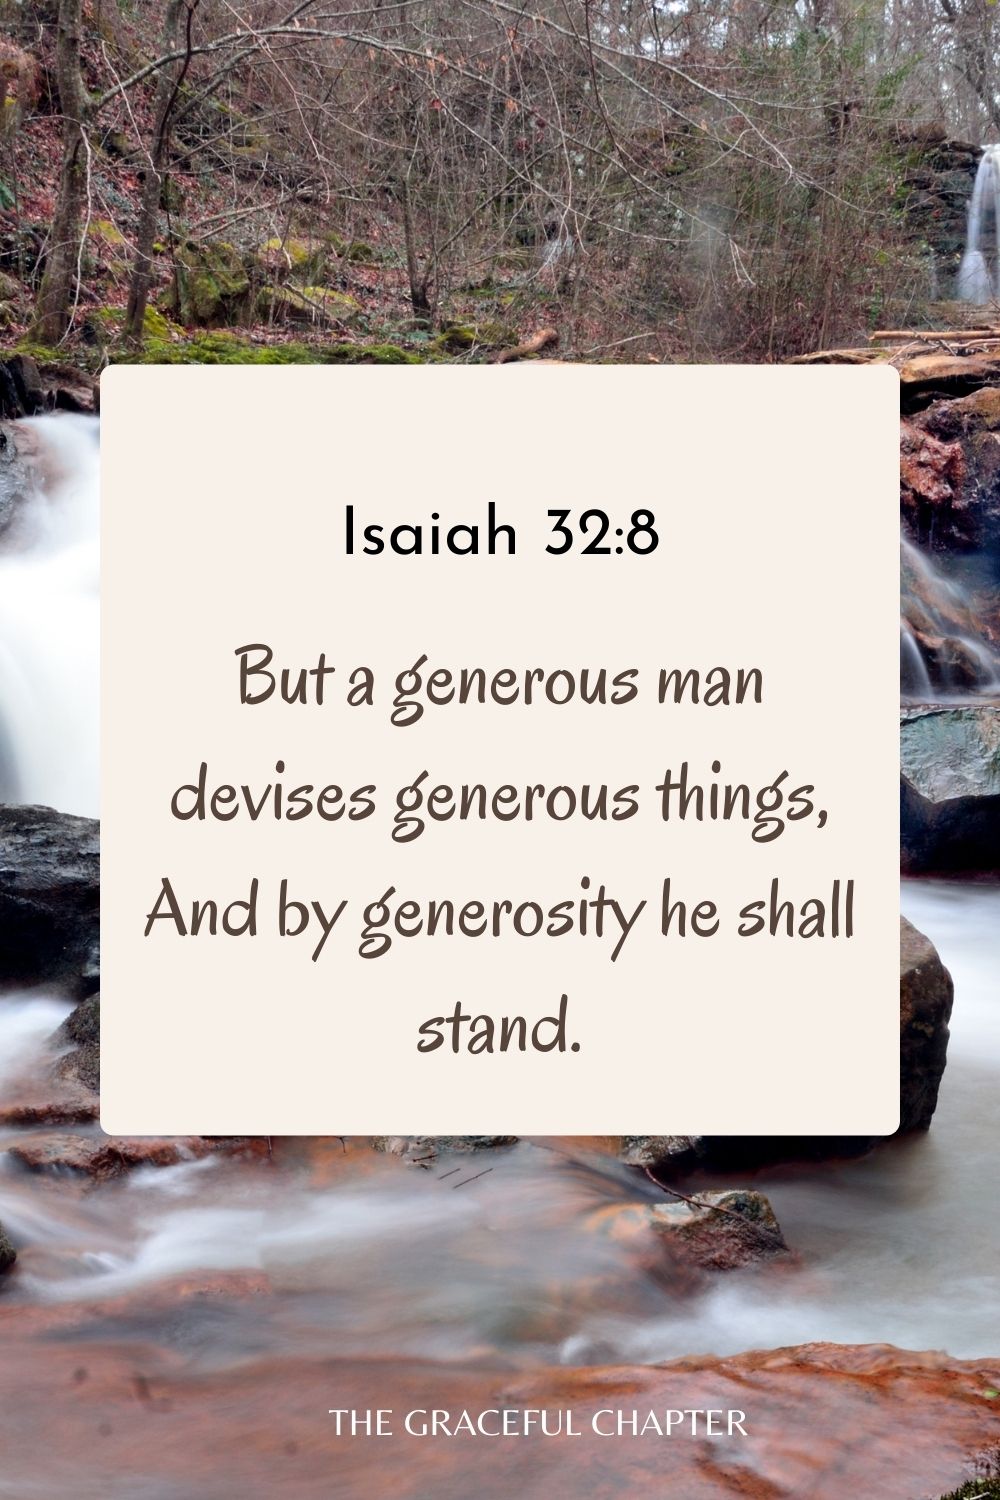 But a generous man devises generous things, And by generosity he shall stand. Isaiah 32:8